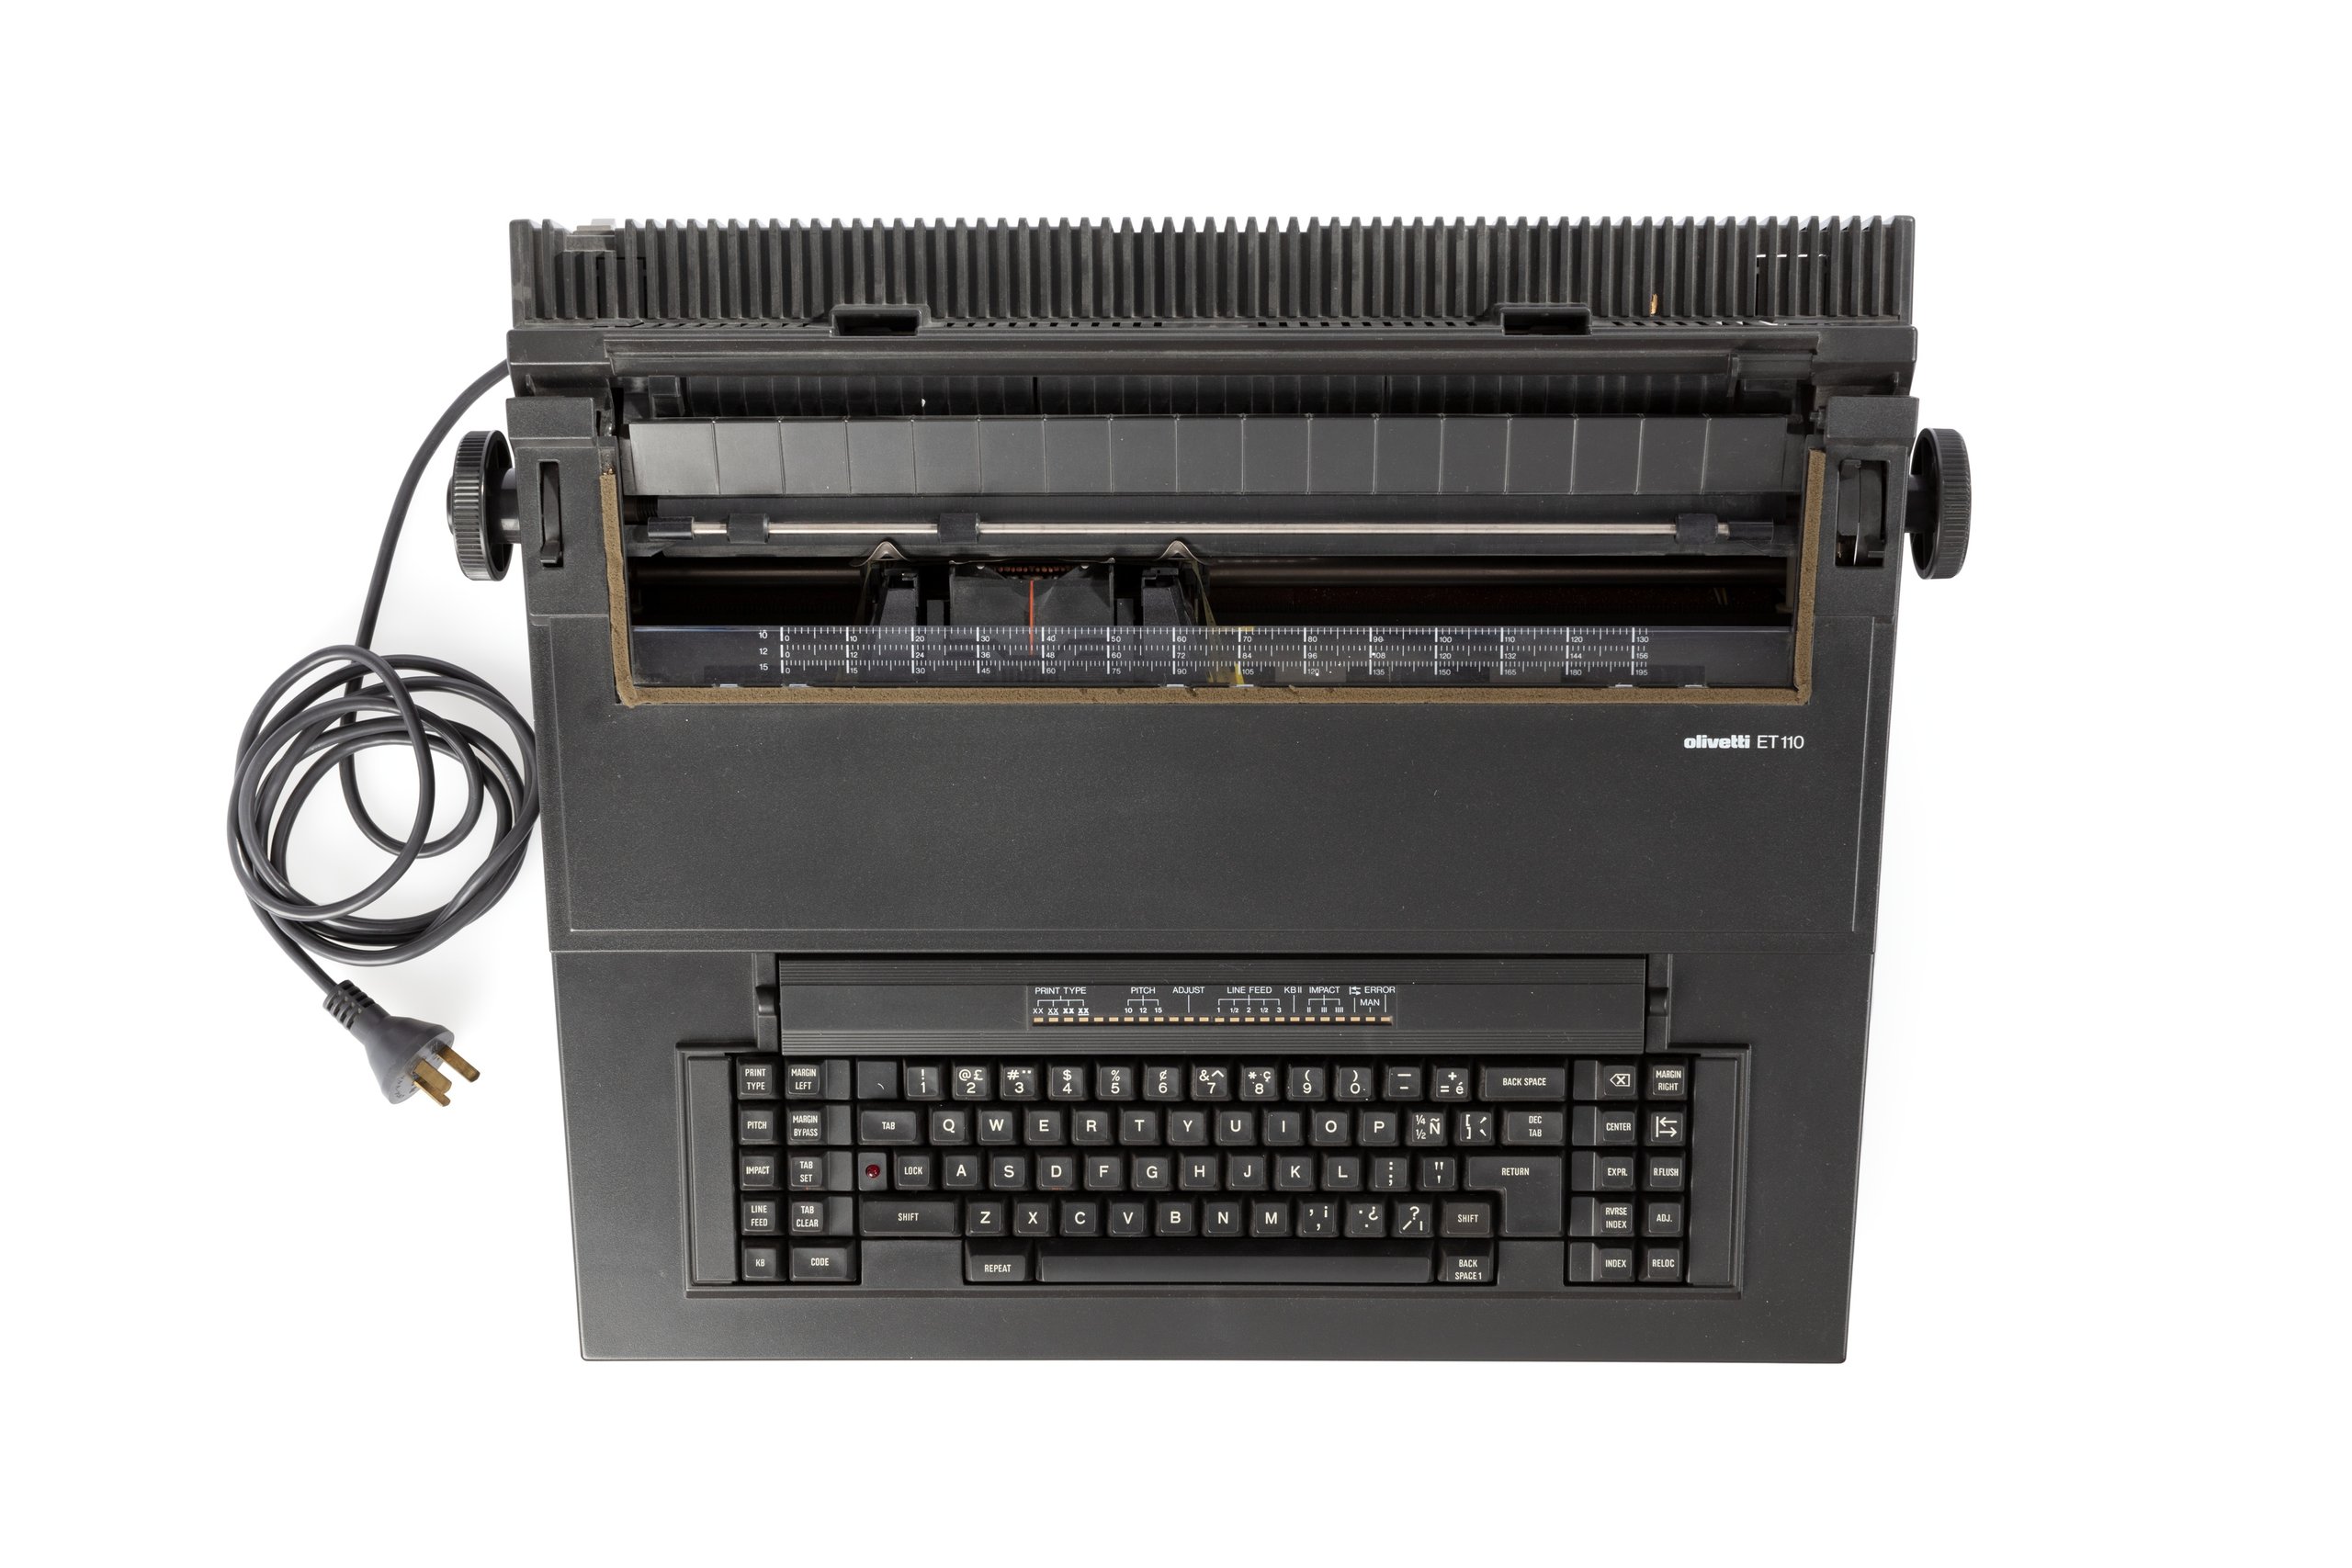 Powerhouse Collection - 'ET110' typewriter made by Olivetti